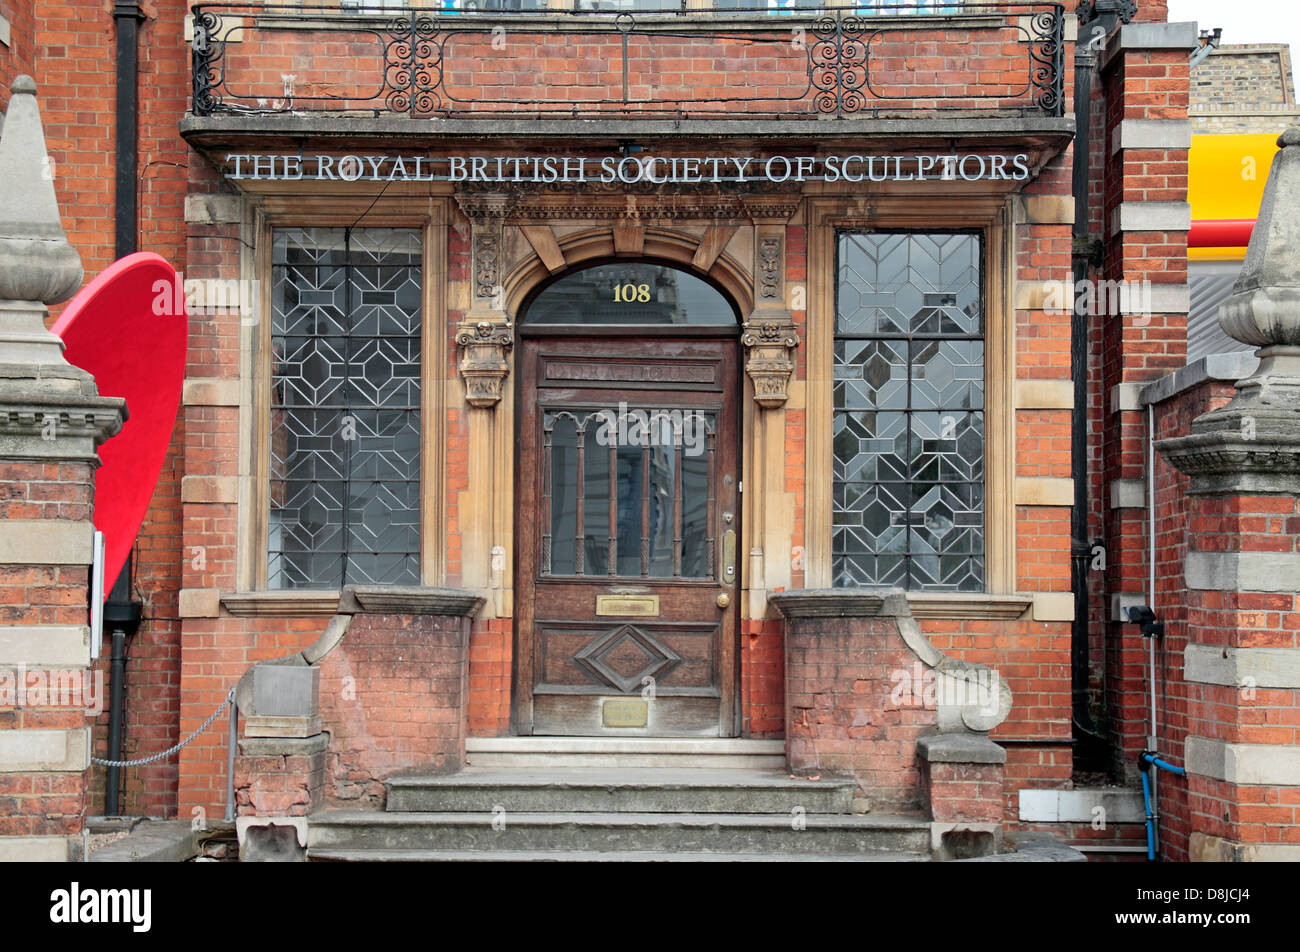 The Royal British Society of Sculptors,108 Old Brompton Rd, South Kensington, London SW7, UK. Stock Photo